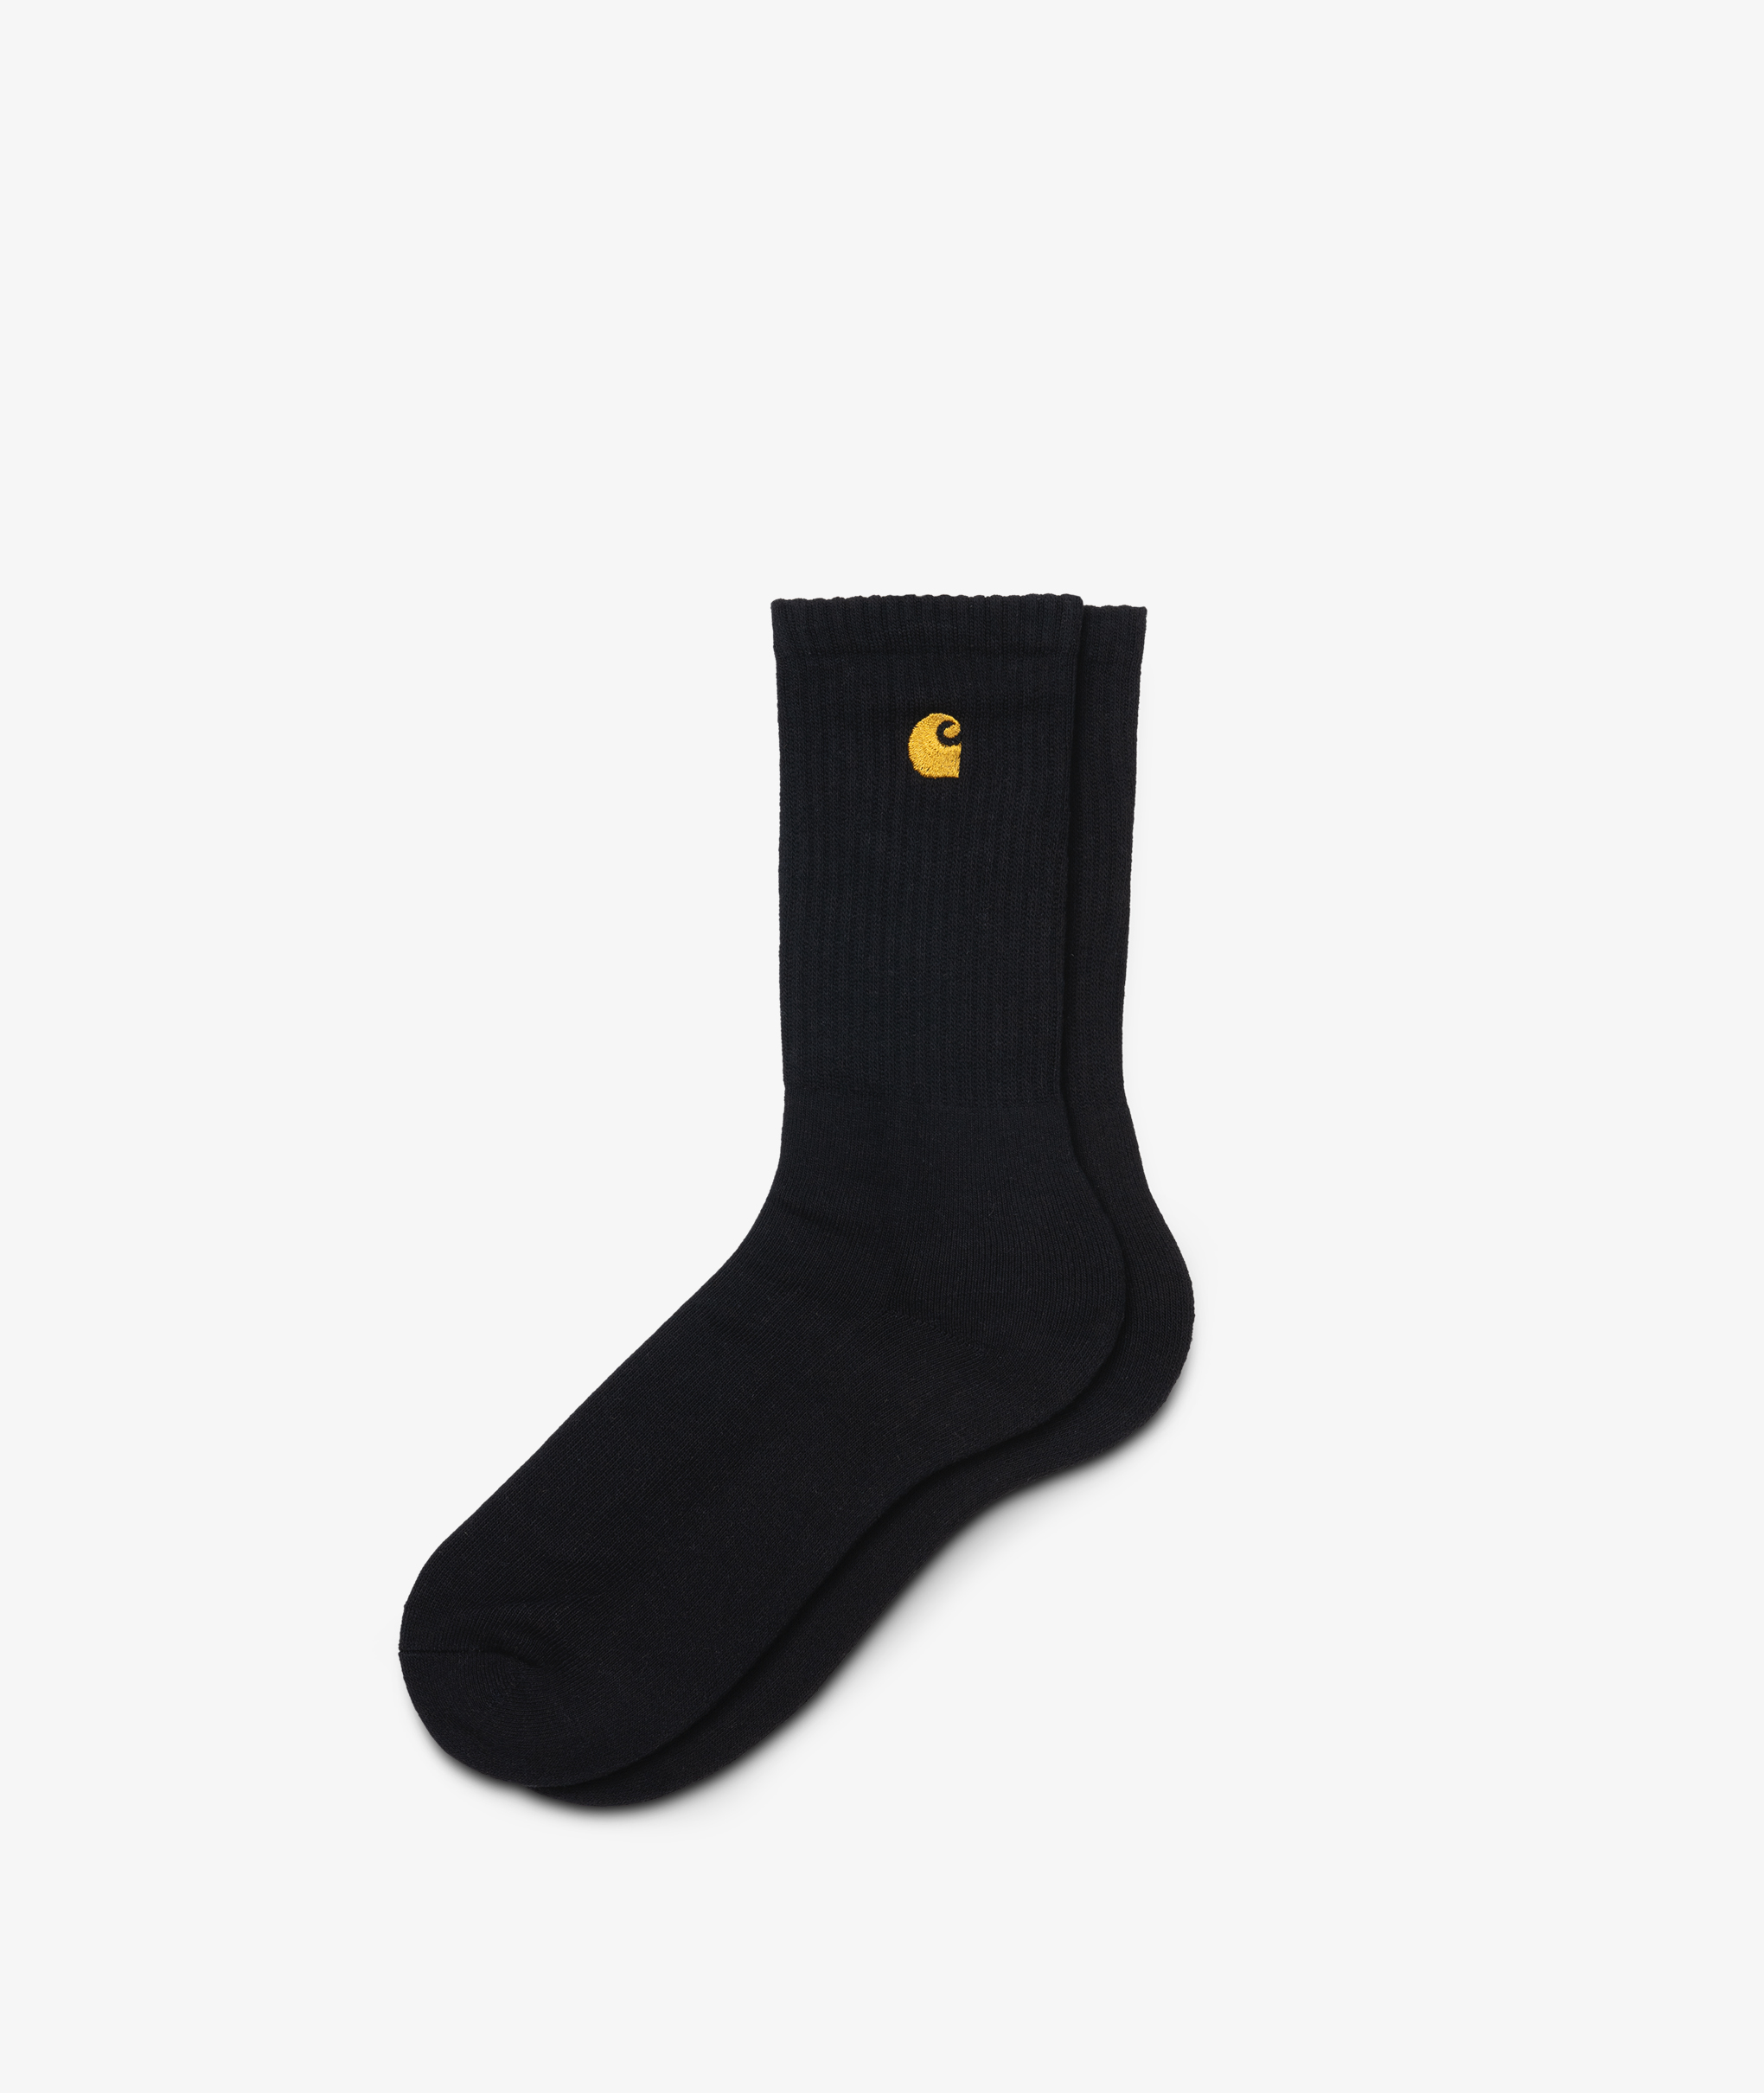 Norse Store | Shipping Worldwide - Carhartt WIP Chase Socks - Black / Gold